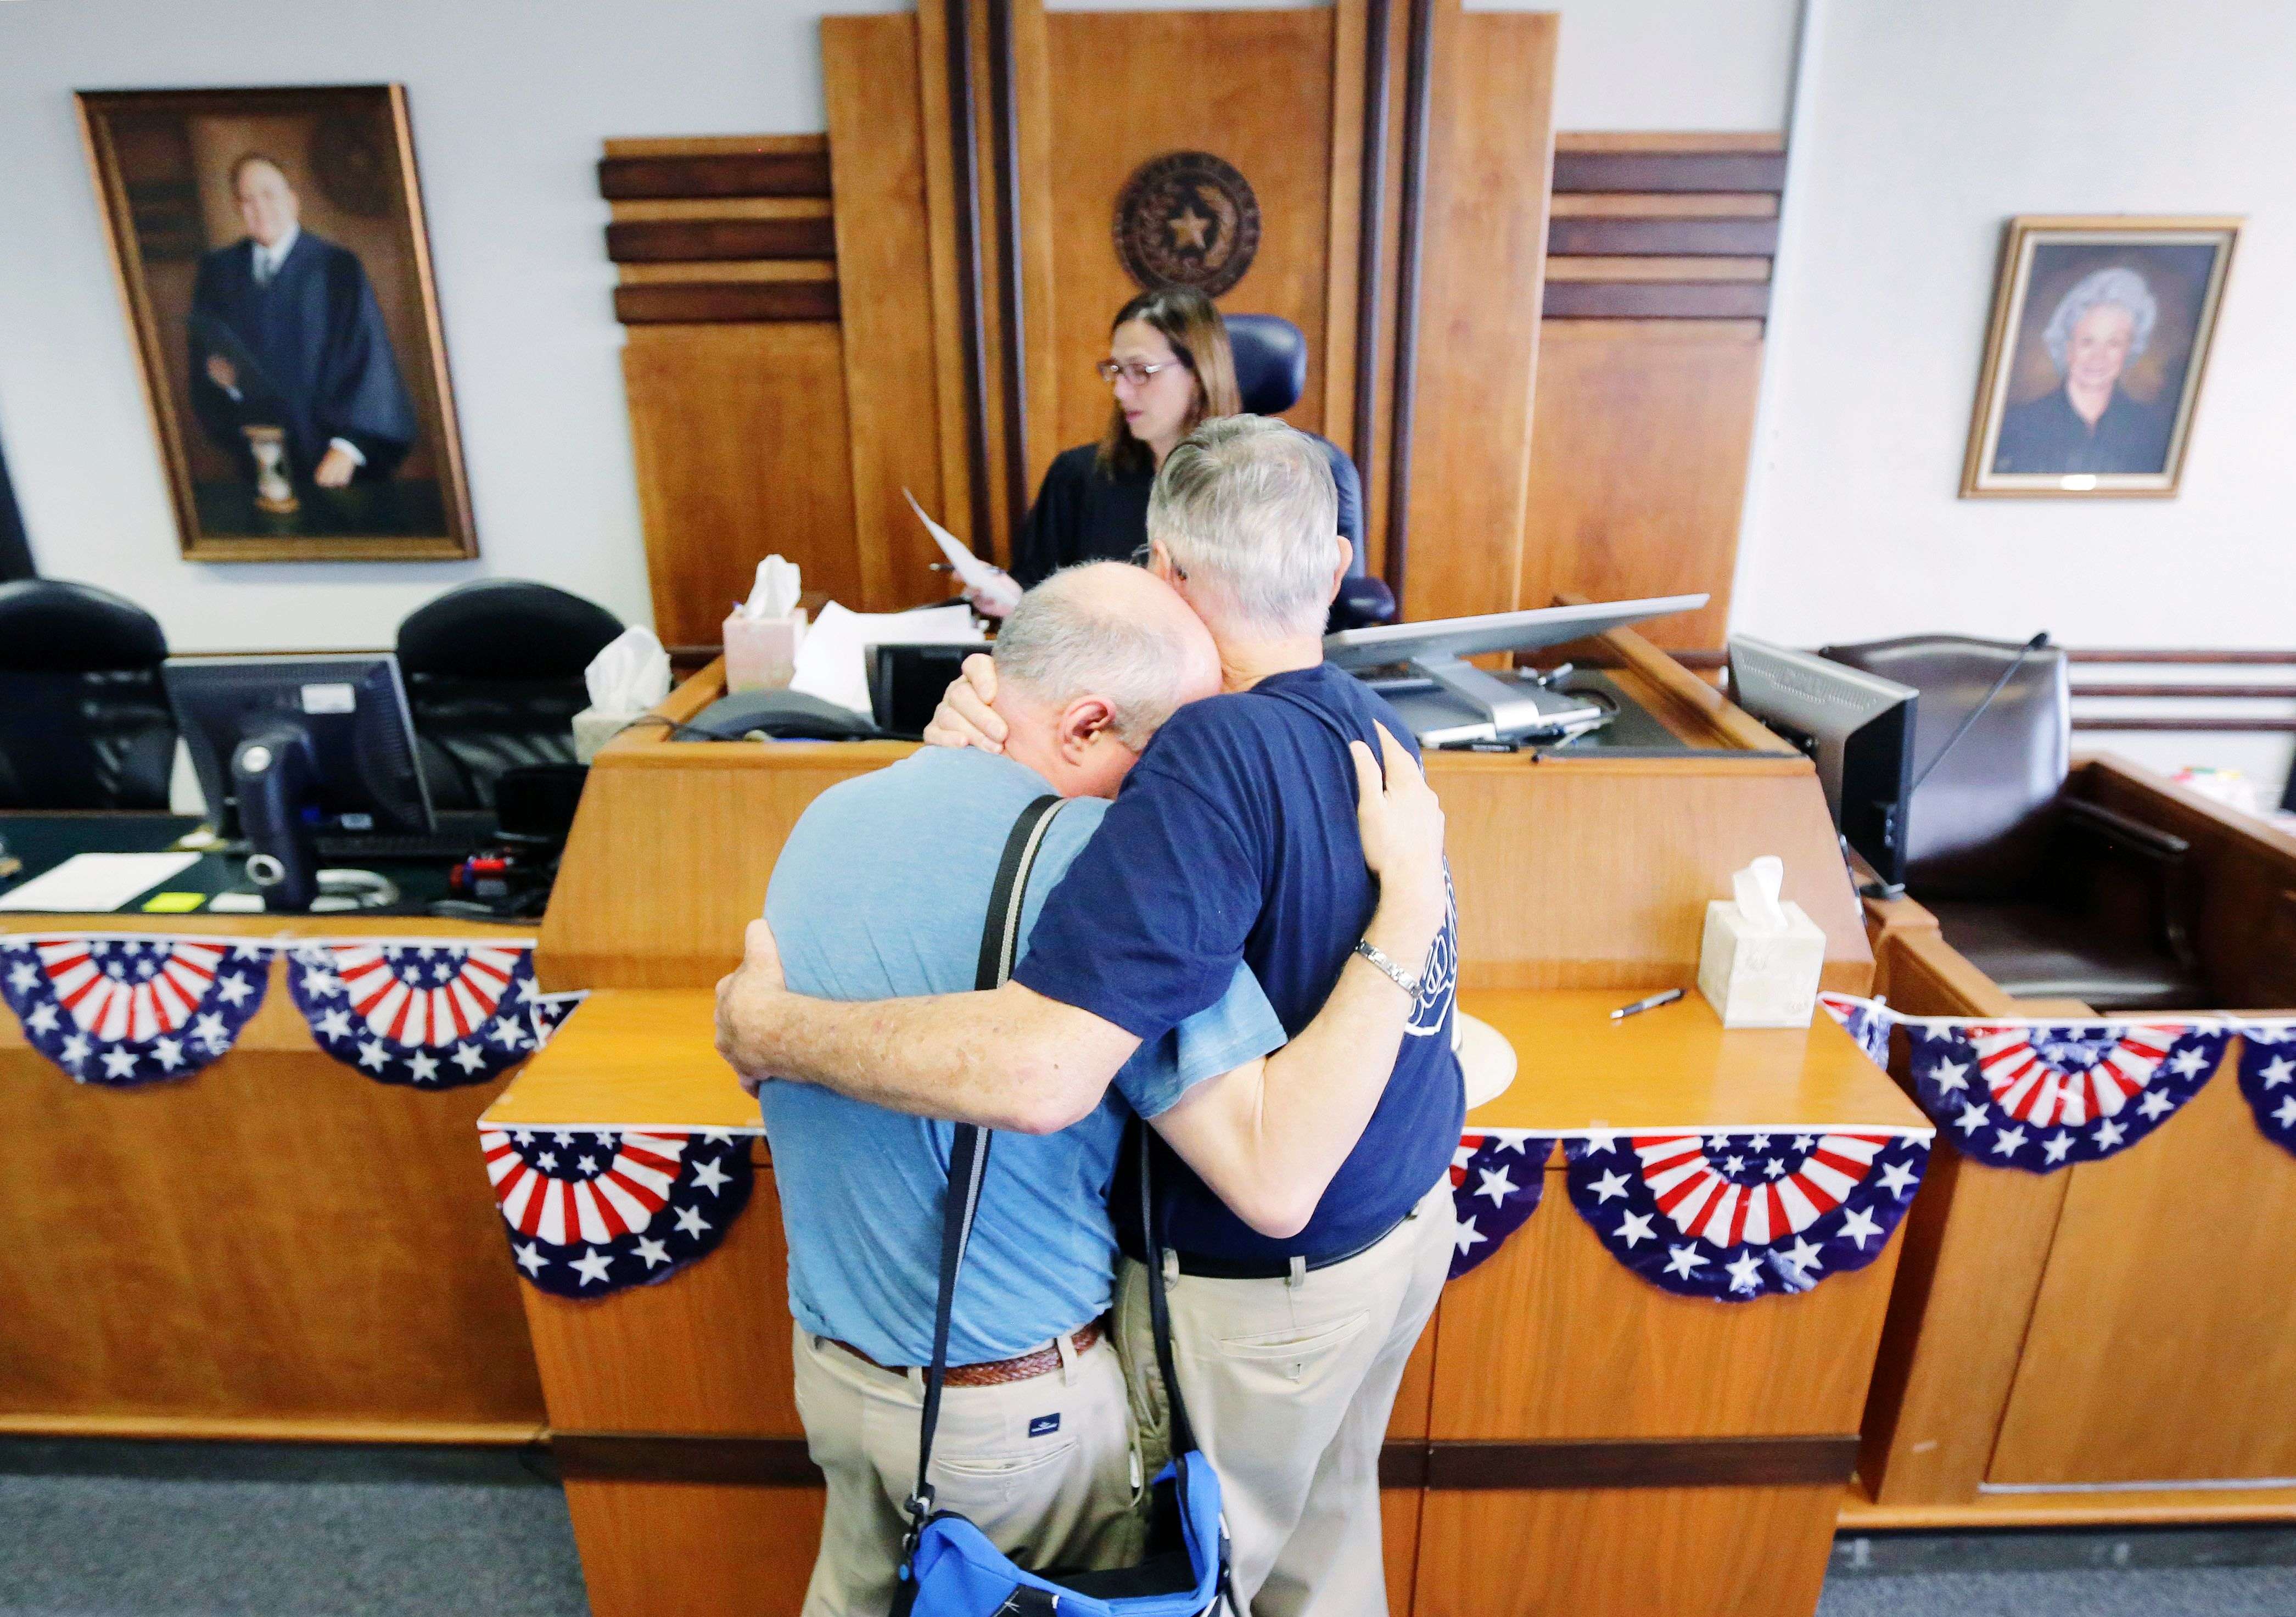 Gerald Gafford, right, comforts his partner of 28 years, Jeff Sralla, left, as they stand before Judge Amy Clark Meachum to obtain a time waiver at the Travis County Courthouse in Austin, Texas after the US Supreme Court ruled that same-sex couples have the right to marry nationwide. Sralla broke into tears as the judge approved the waiver allowing the couple to get married this weekend. (AP Photo/Eric Gay)